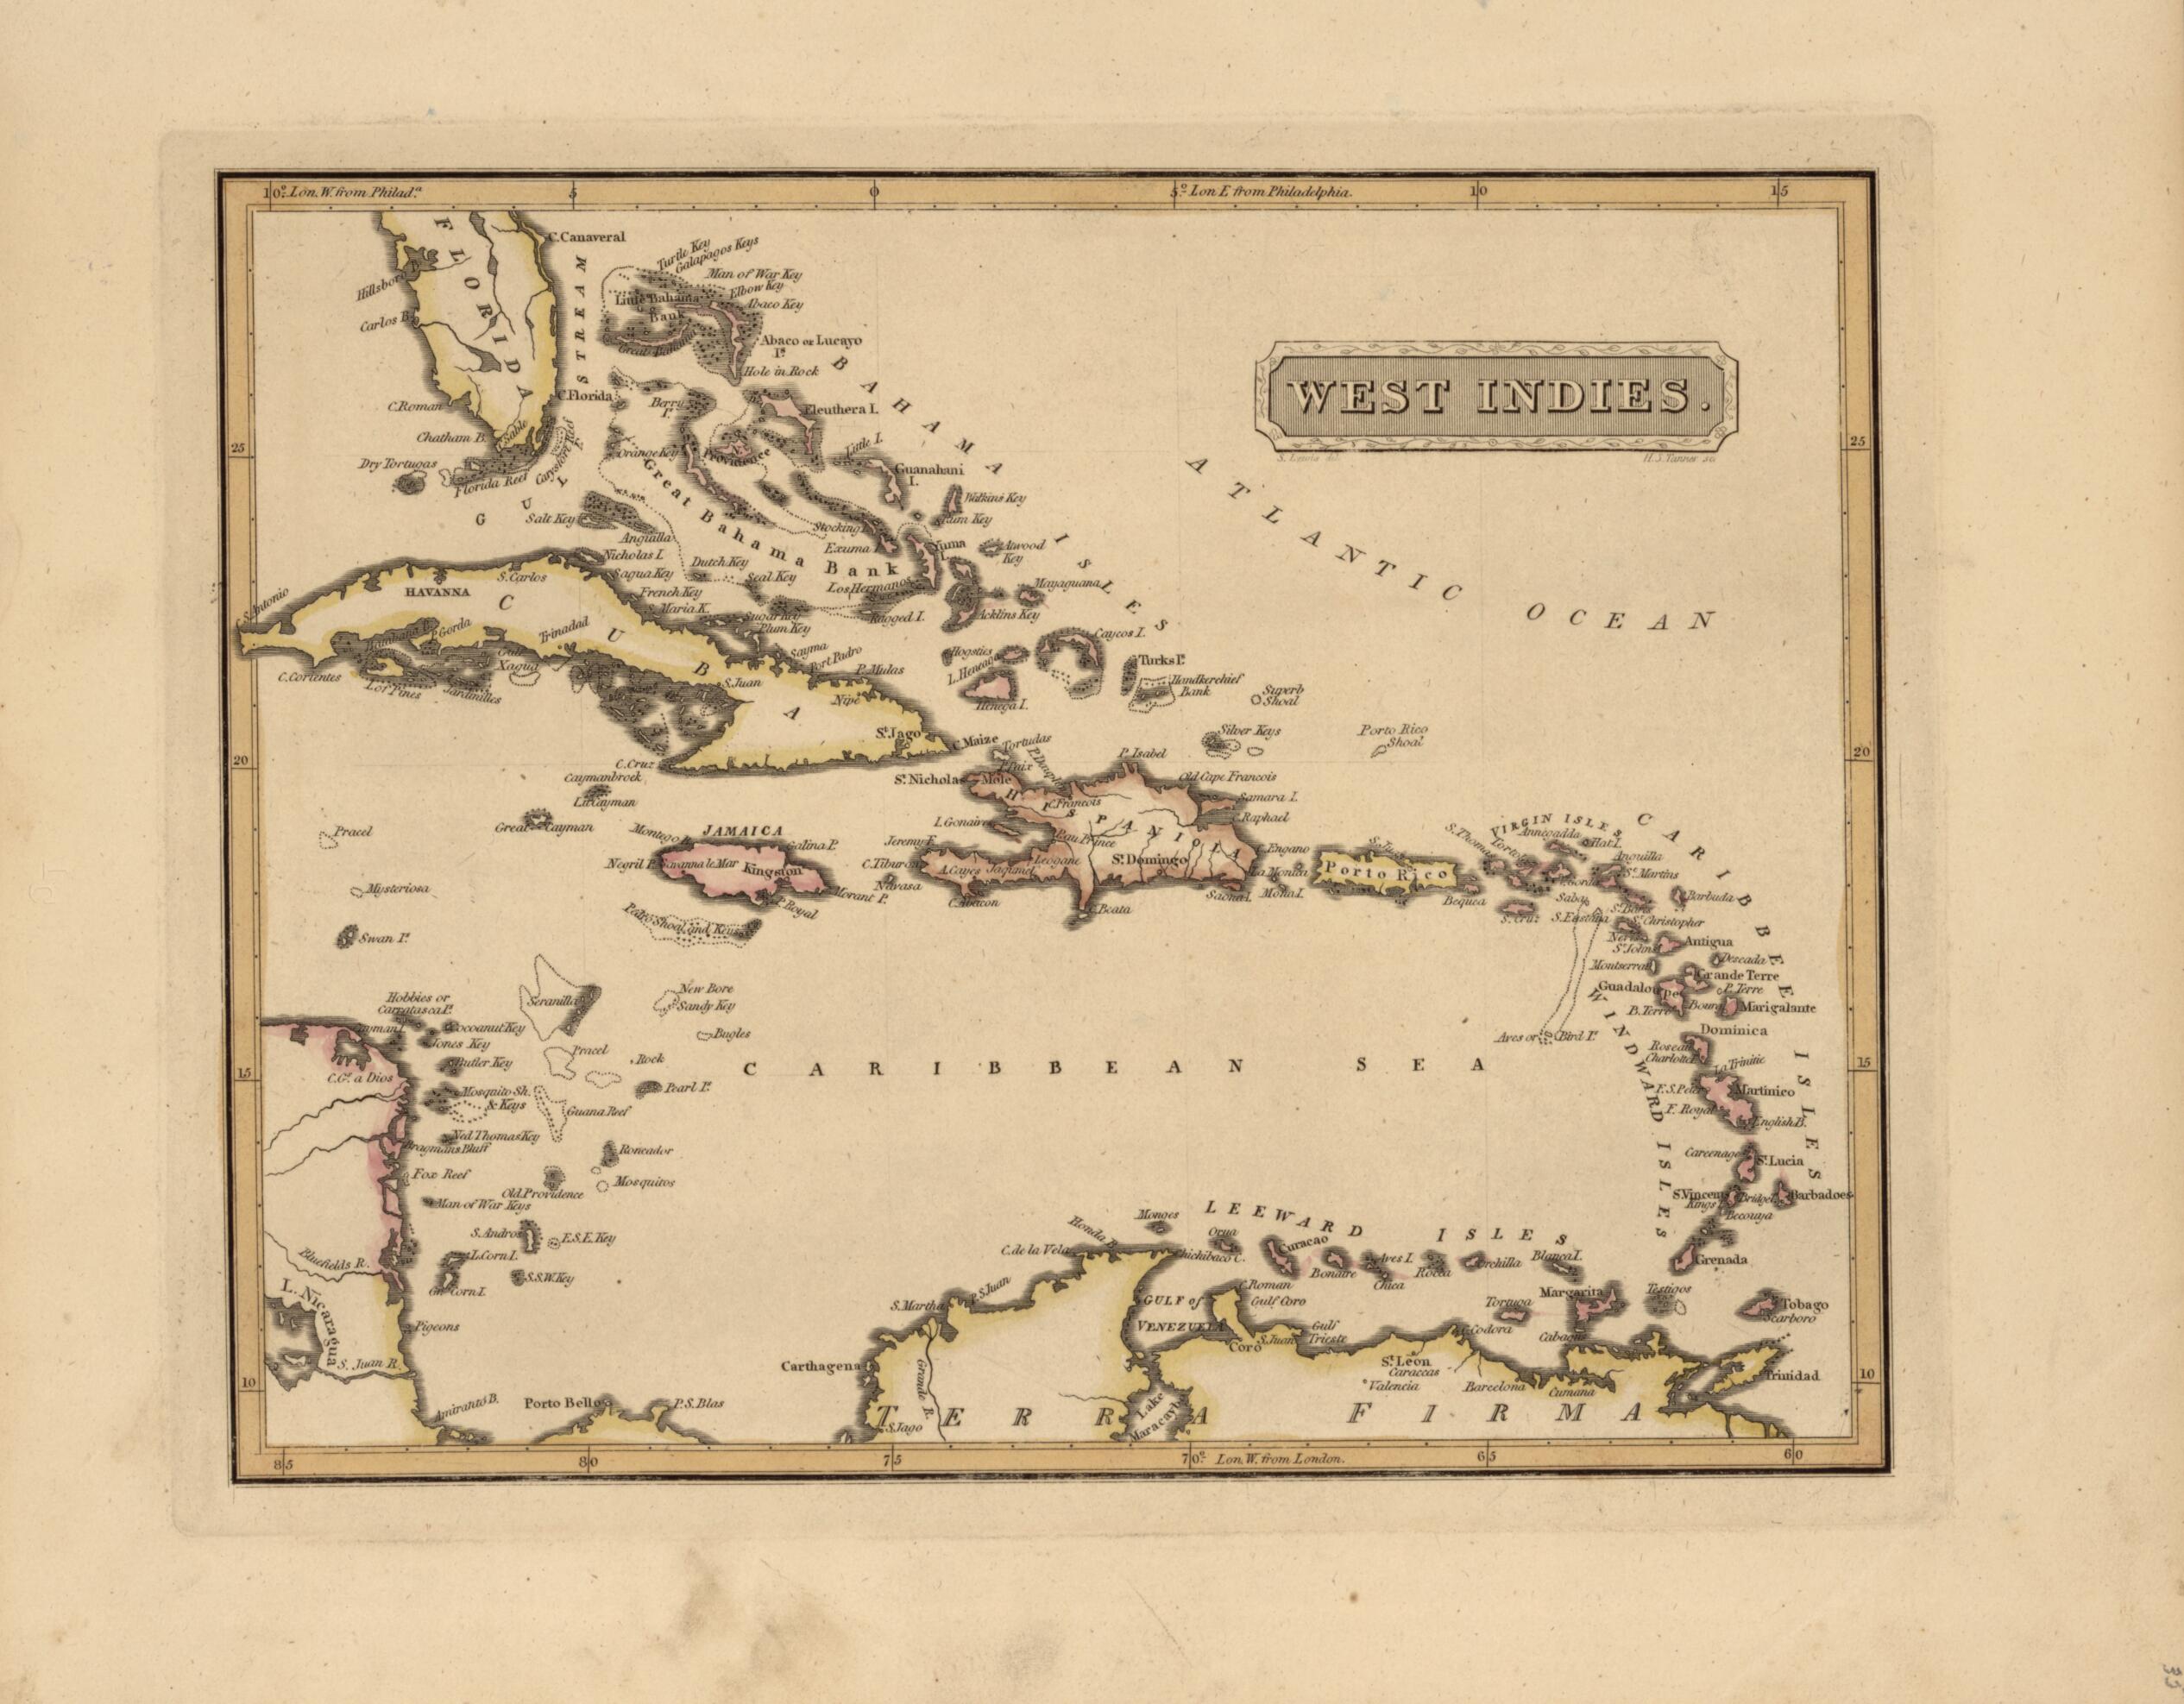 This old map of West Indies from a New and Elegant General Atlas, Containing Maps of Each of the United States. from 1817 was created by Henry Schenck Tanner in 1817